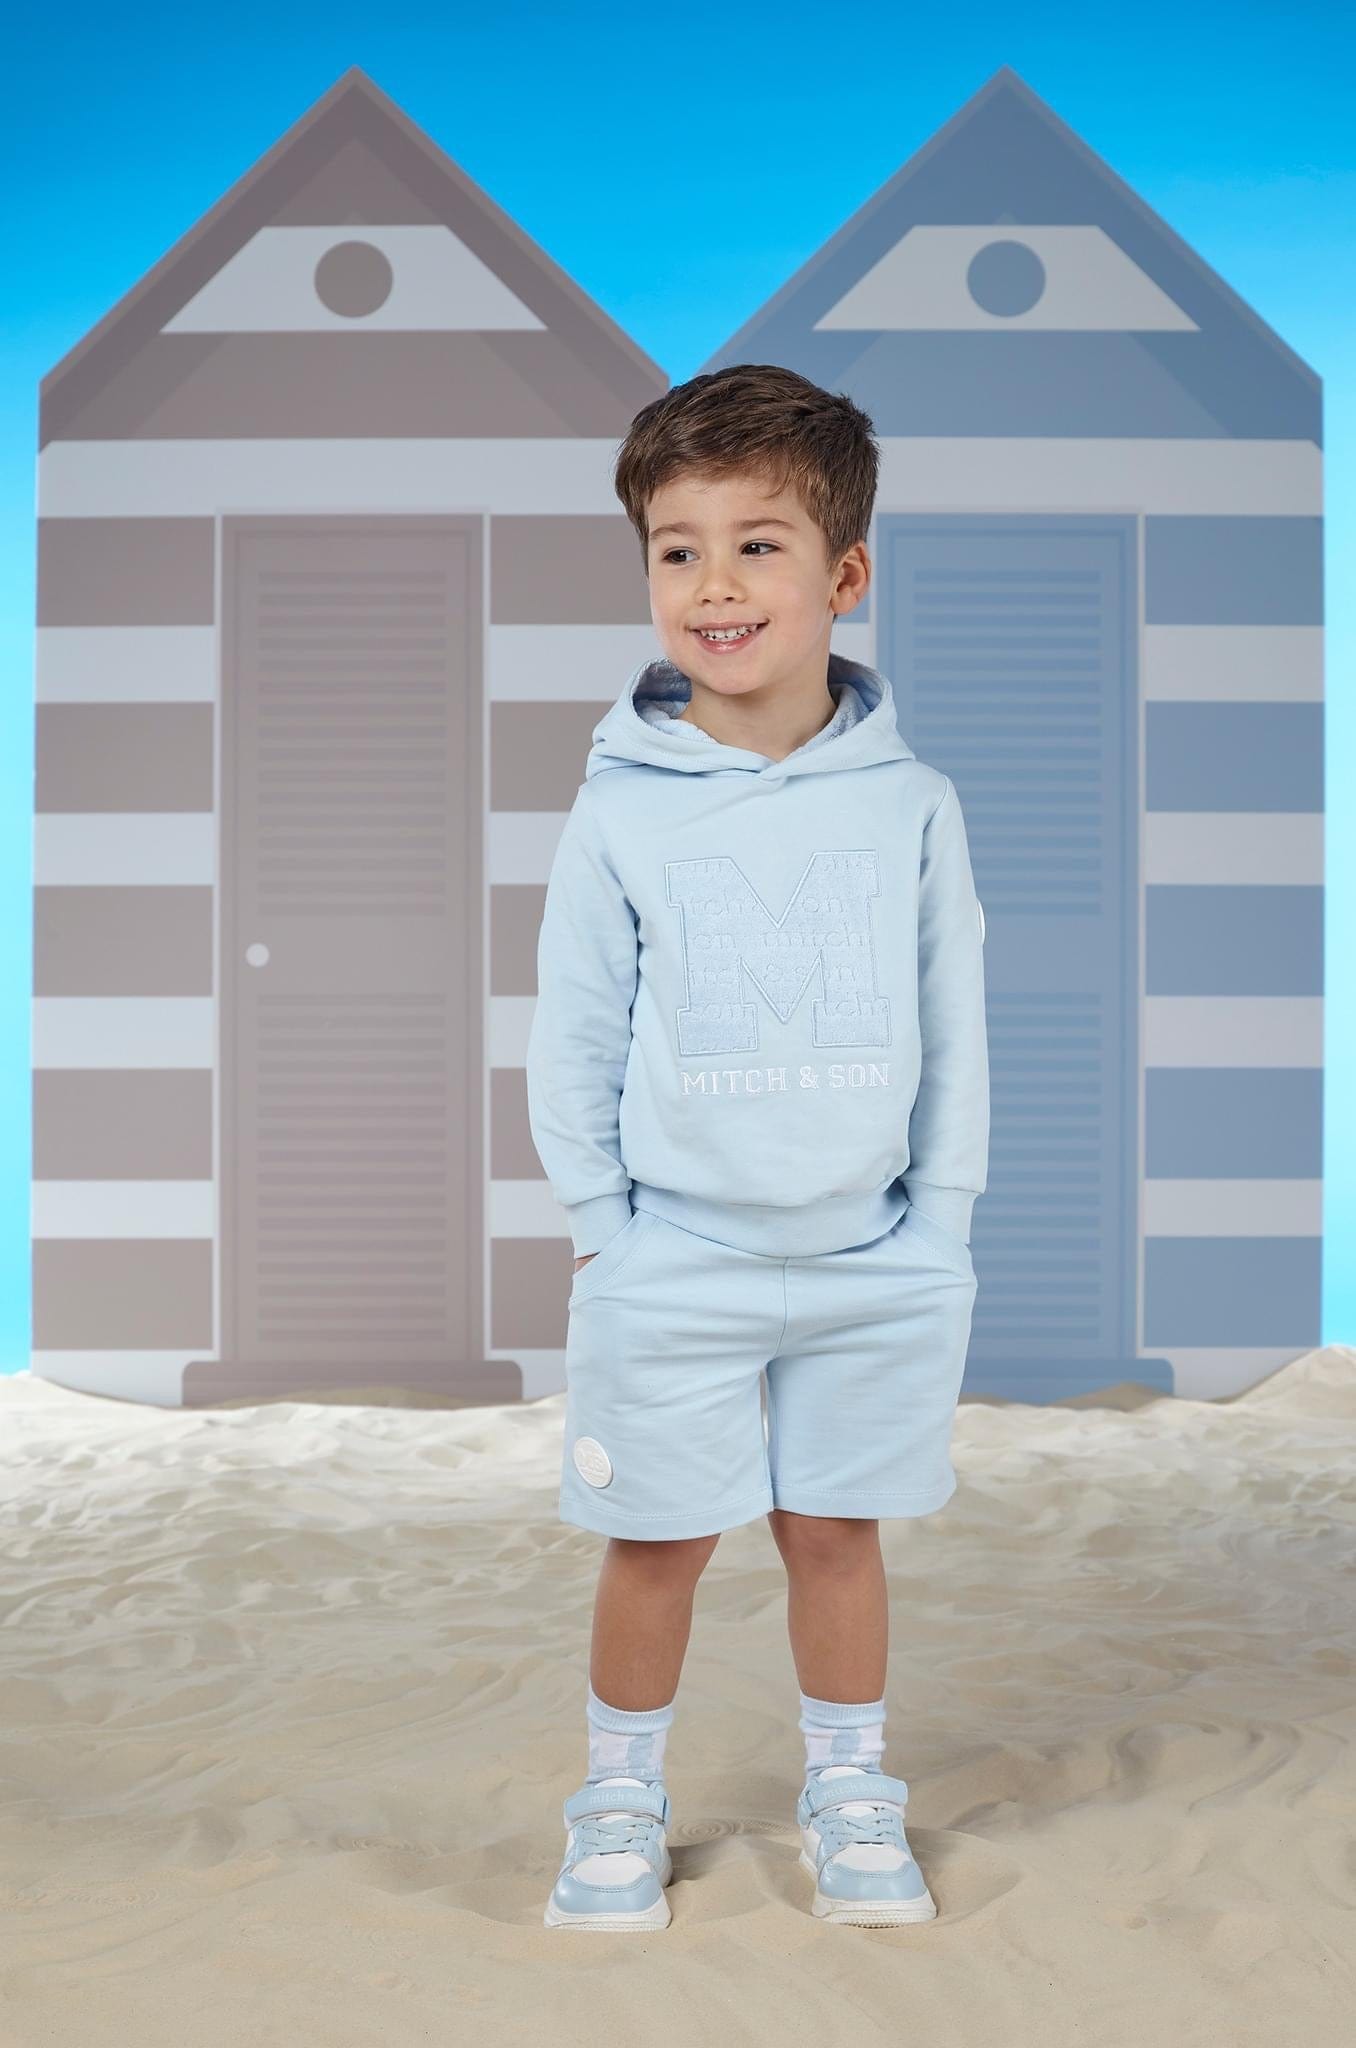 Mitch & Son Hooded Shorts Set - Tommy